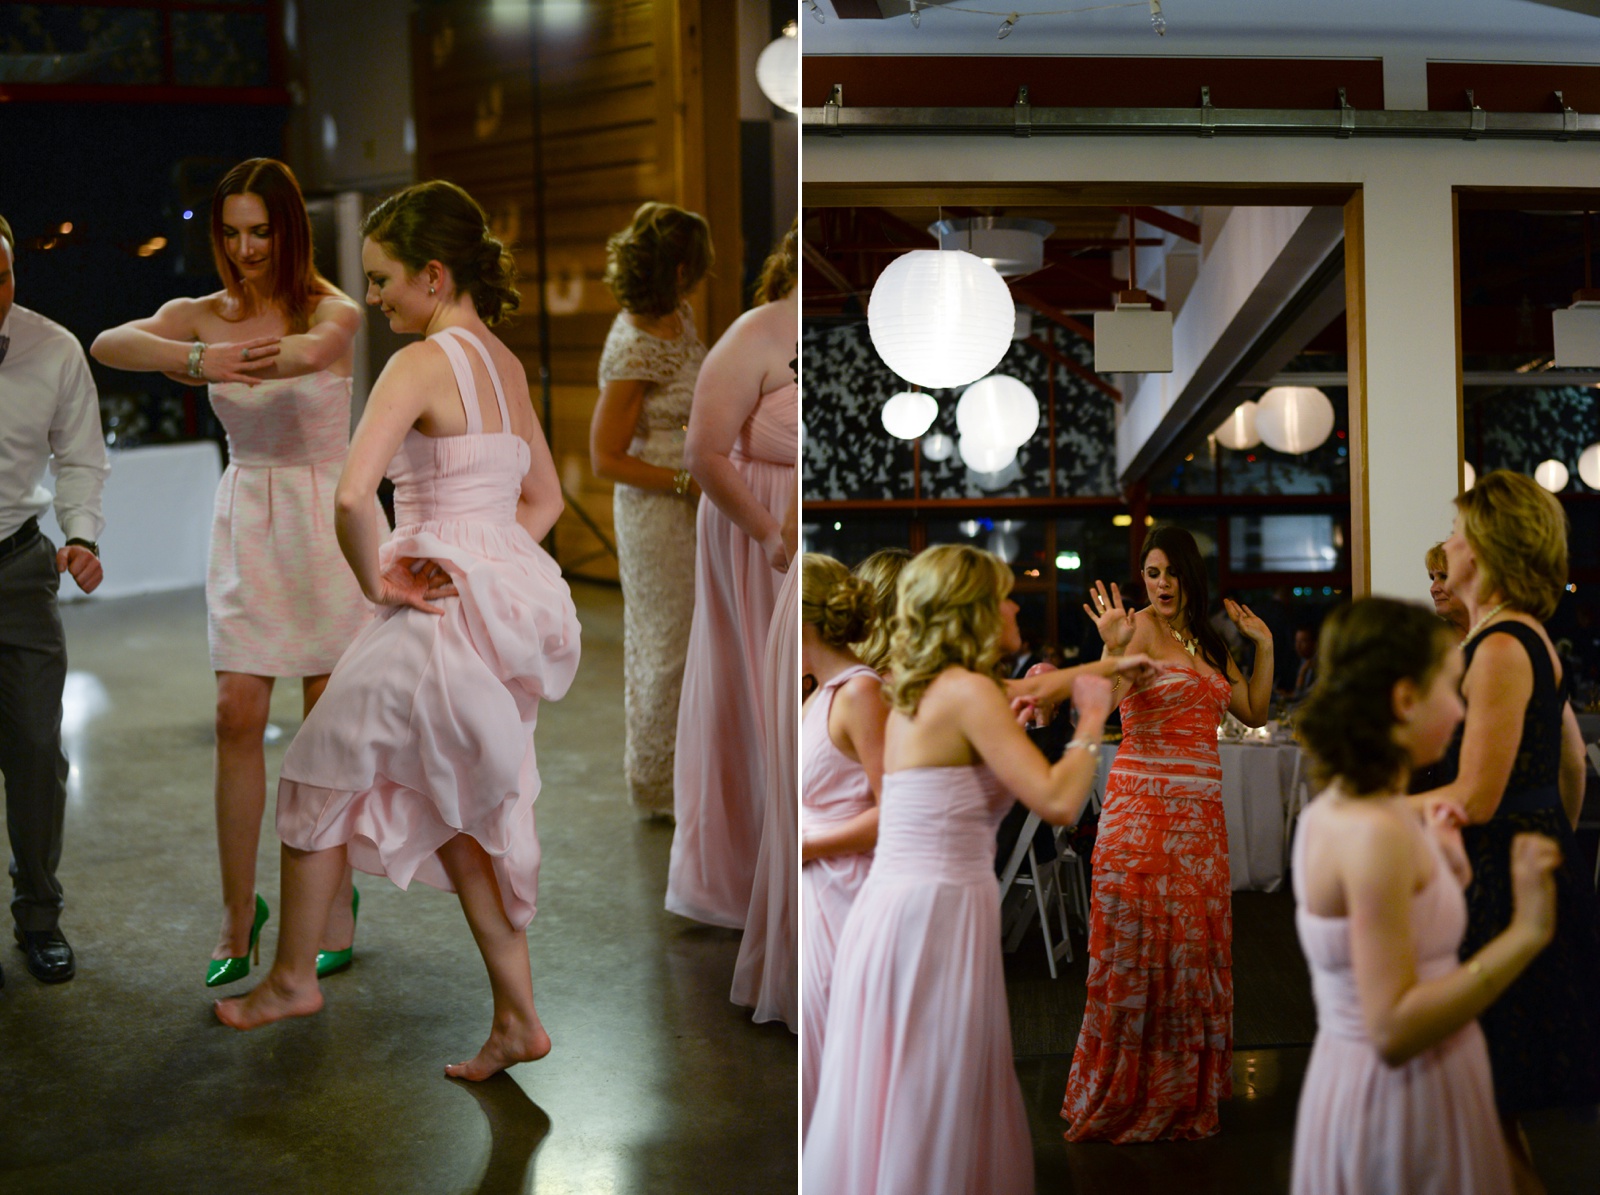 awesome-dancing-of-wedding-guests